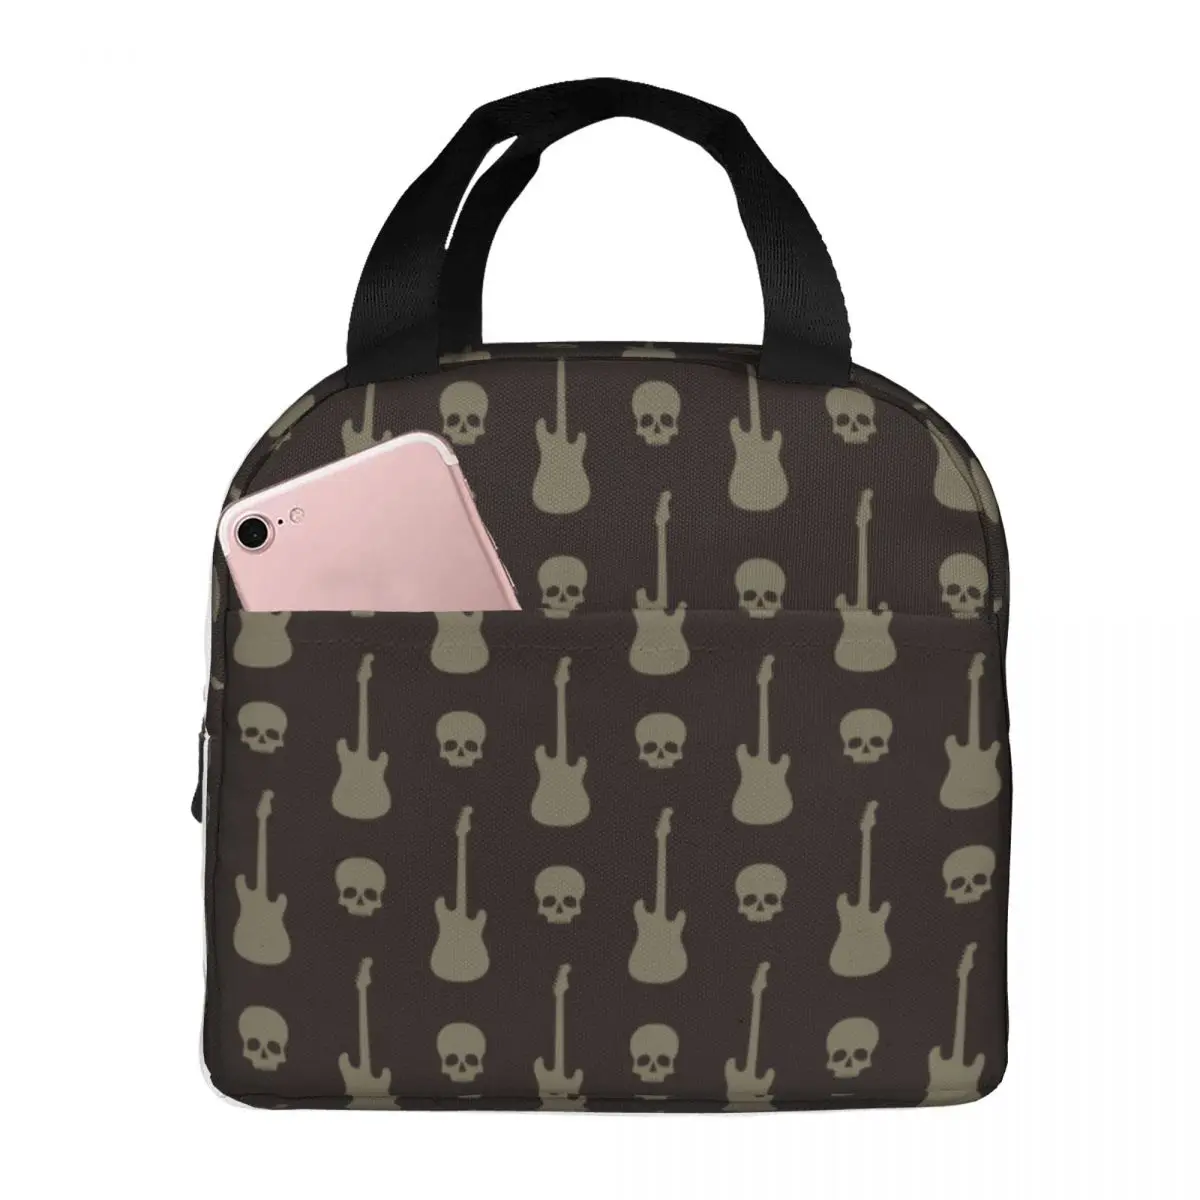 Heavy Metal Skull Lunch Bag Portable Insulated Canvas Cooler Bags Thermal Cold Food Picnic Travel Tote for Women Kids